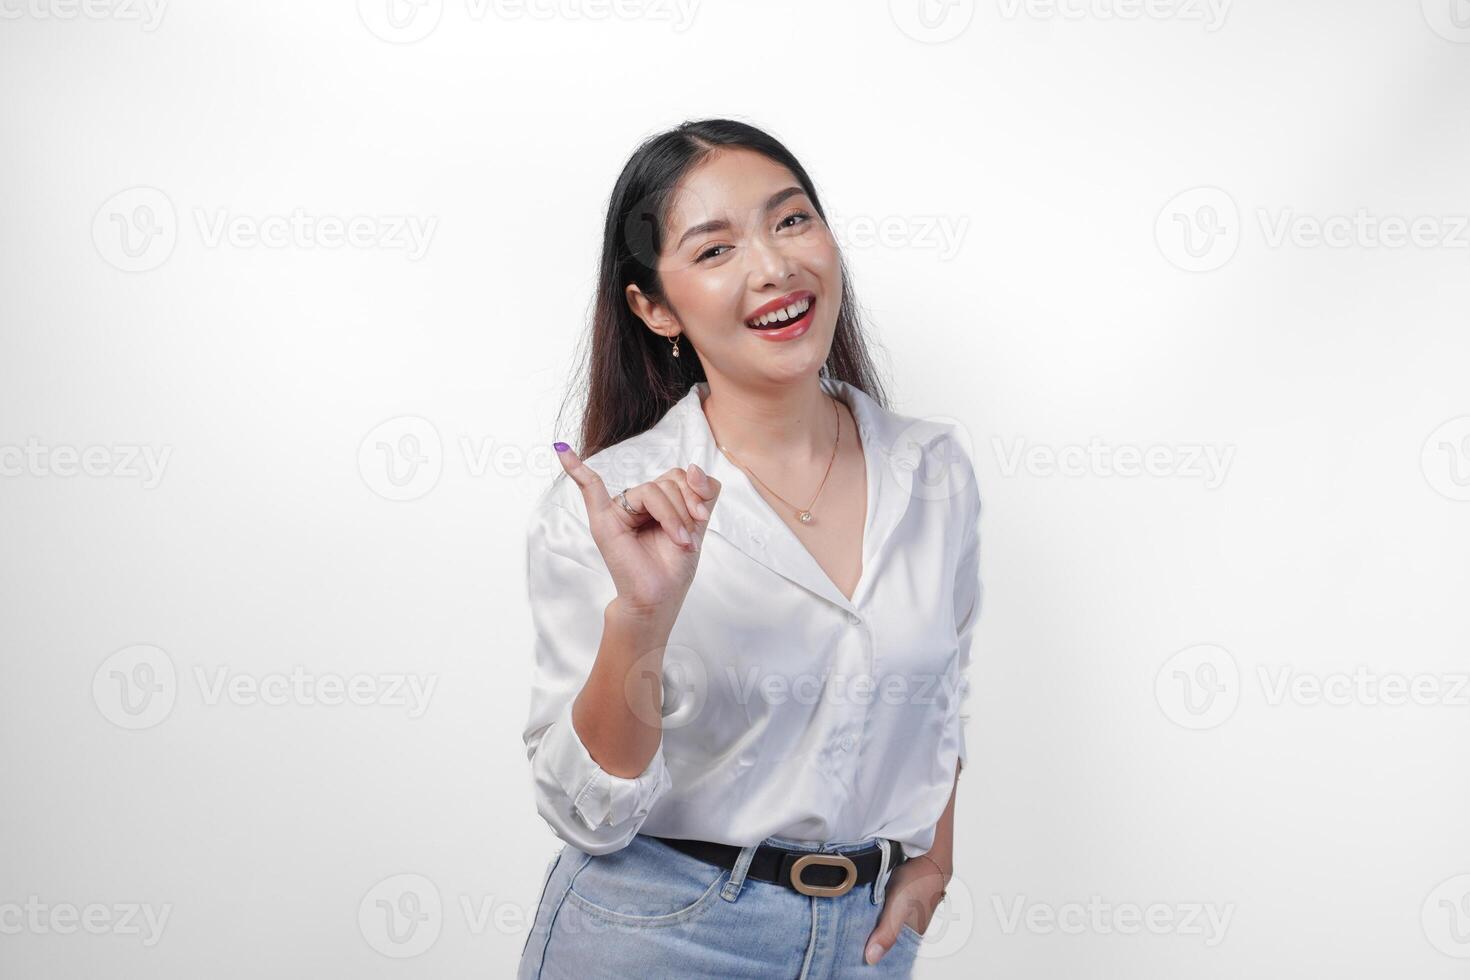 Young Asian woman proudly showing little finger dipped in purple ink after voting for president and parliament election, expressing excitement and happiness photo